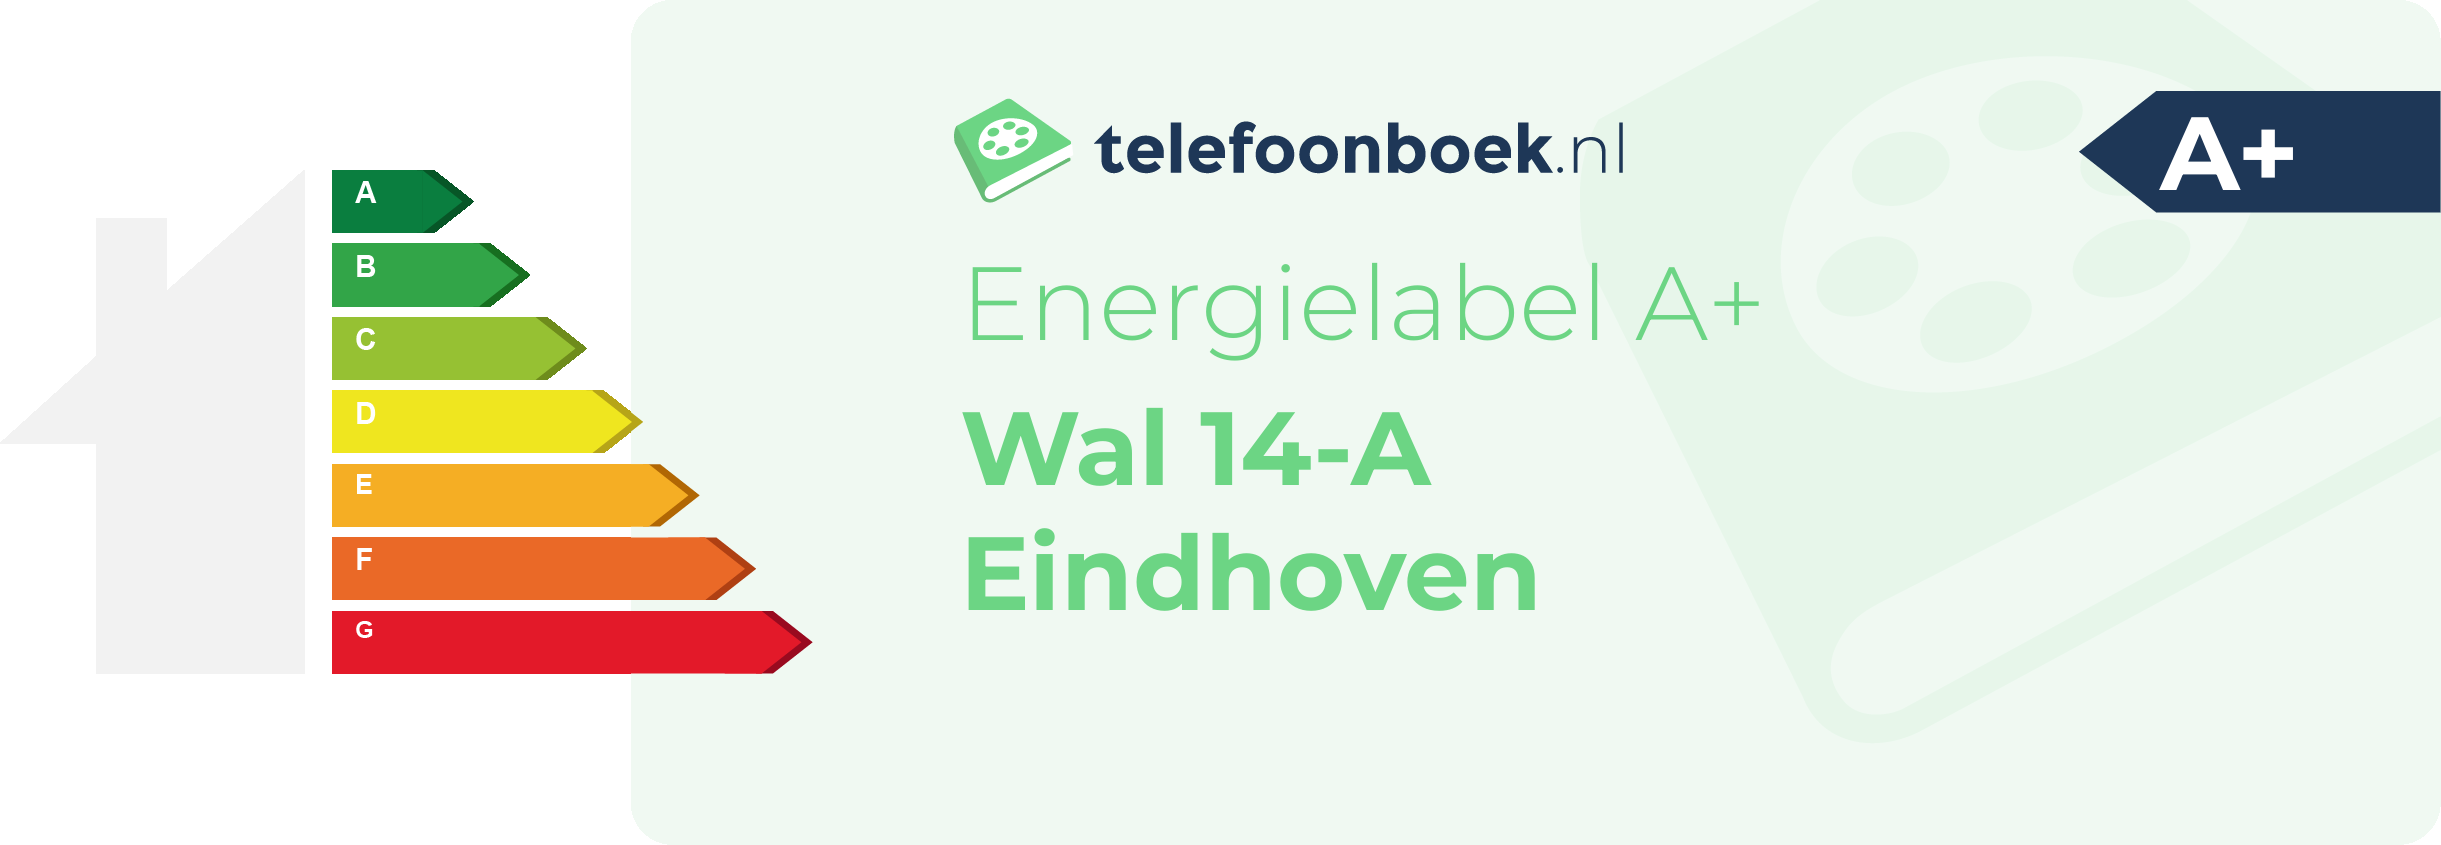 Energielabel Wal 14-A Eindhoven